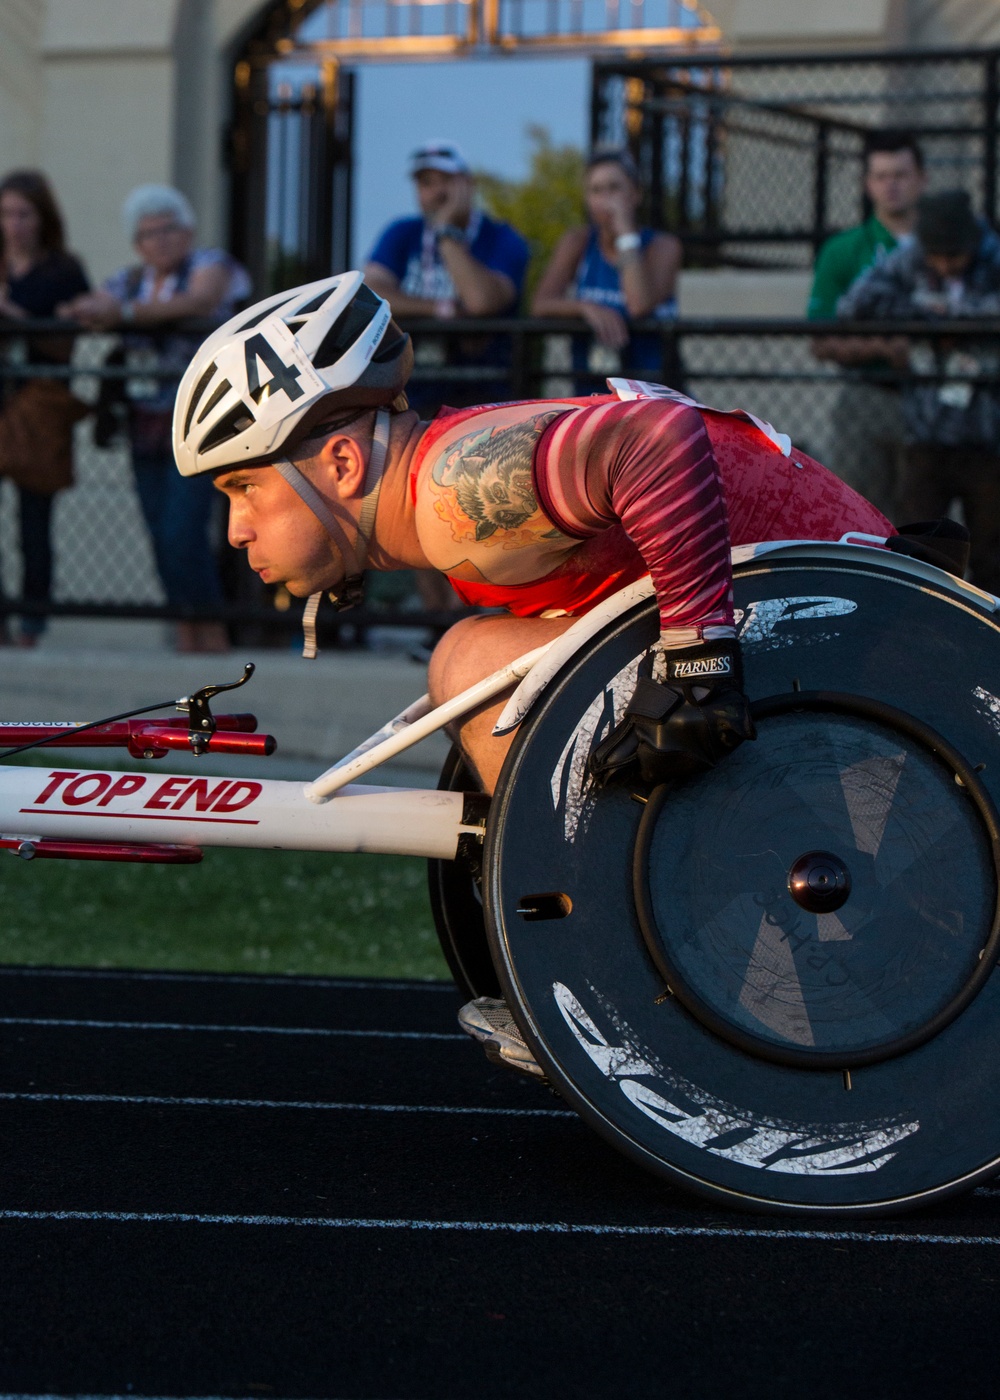 2017 DoD Warrior Games Track Competition